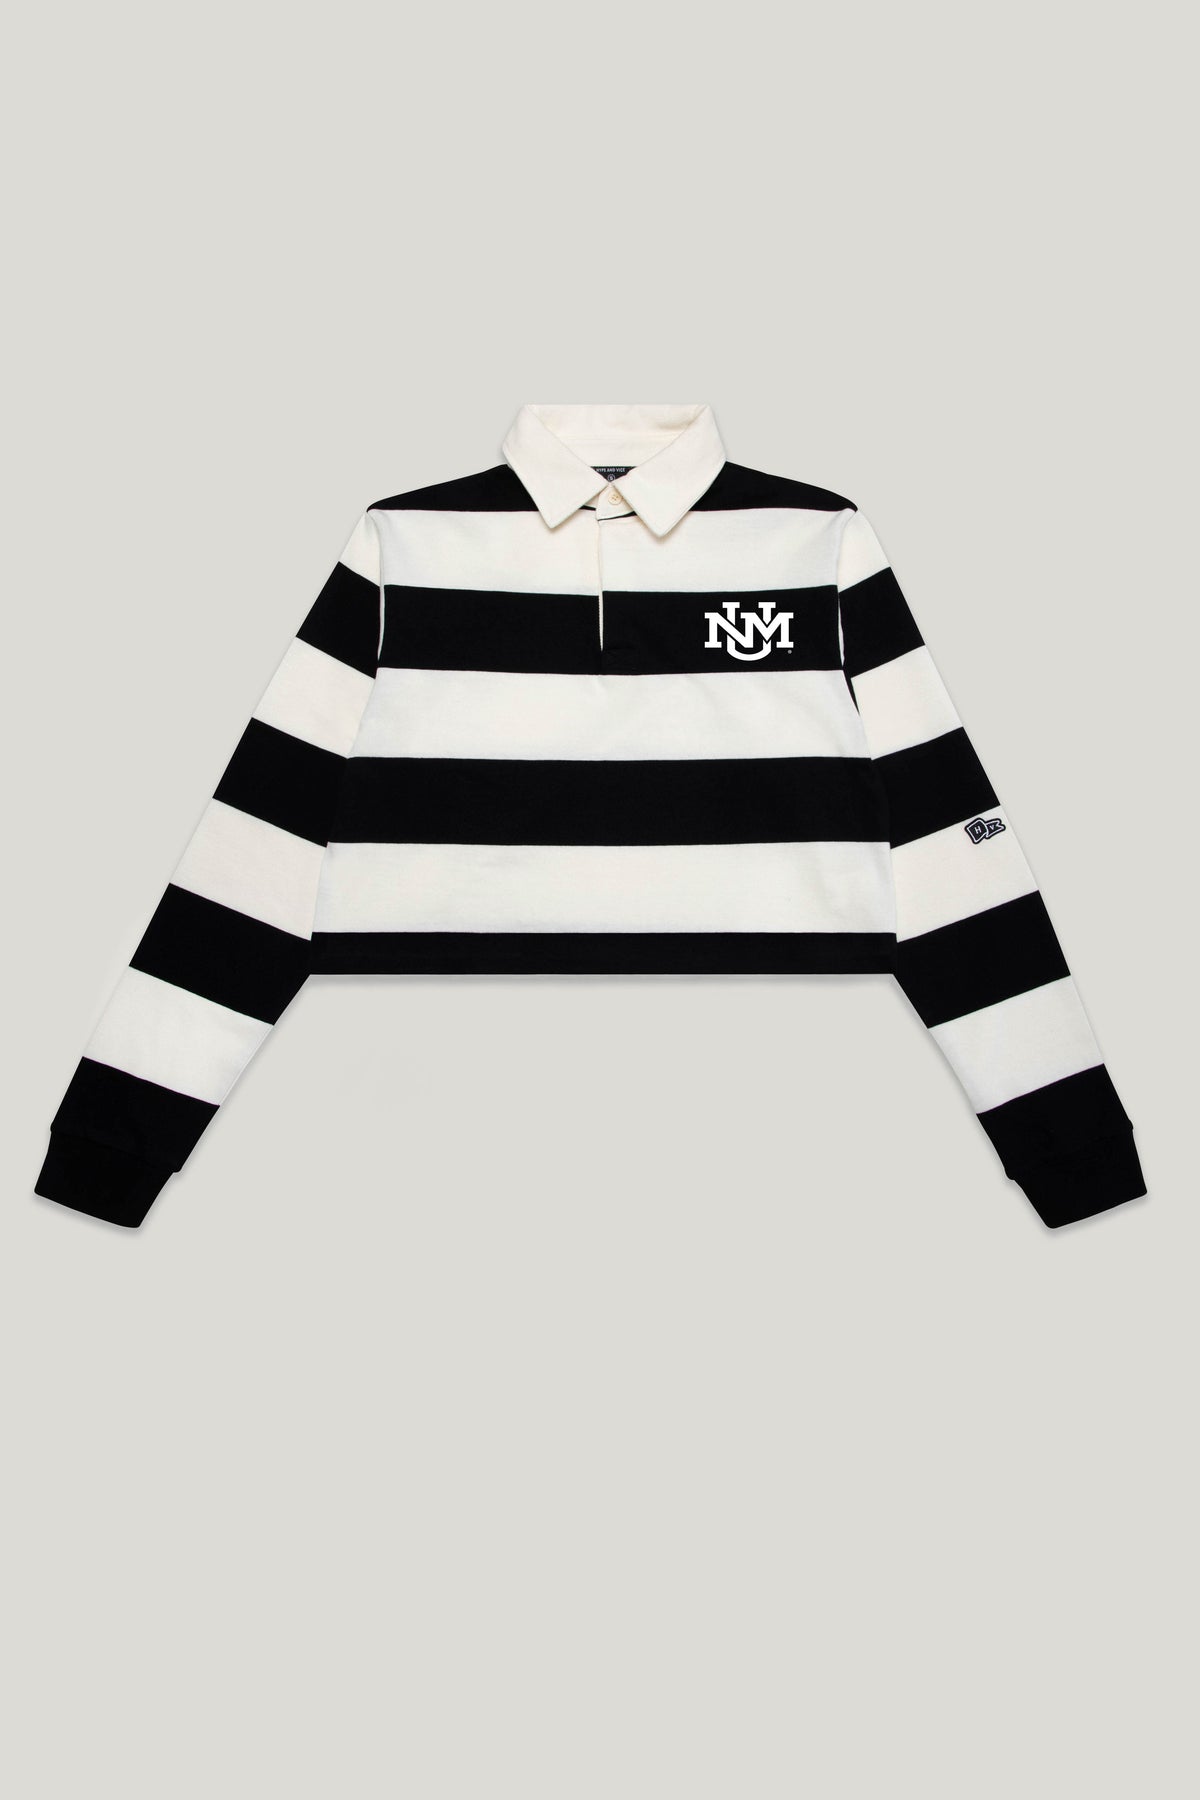 UNM Rugby Top